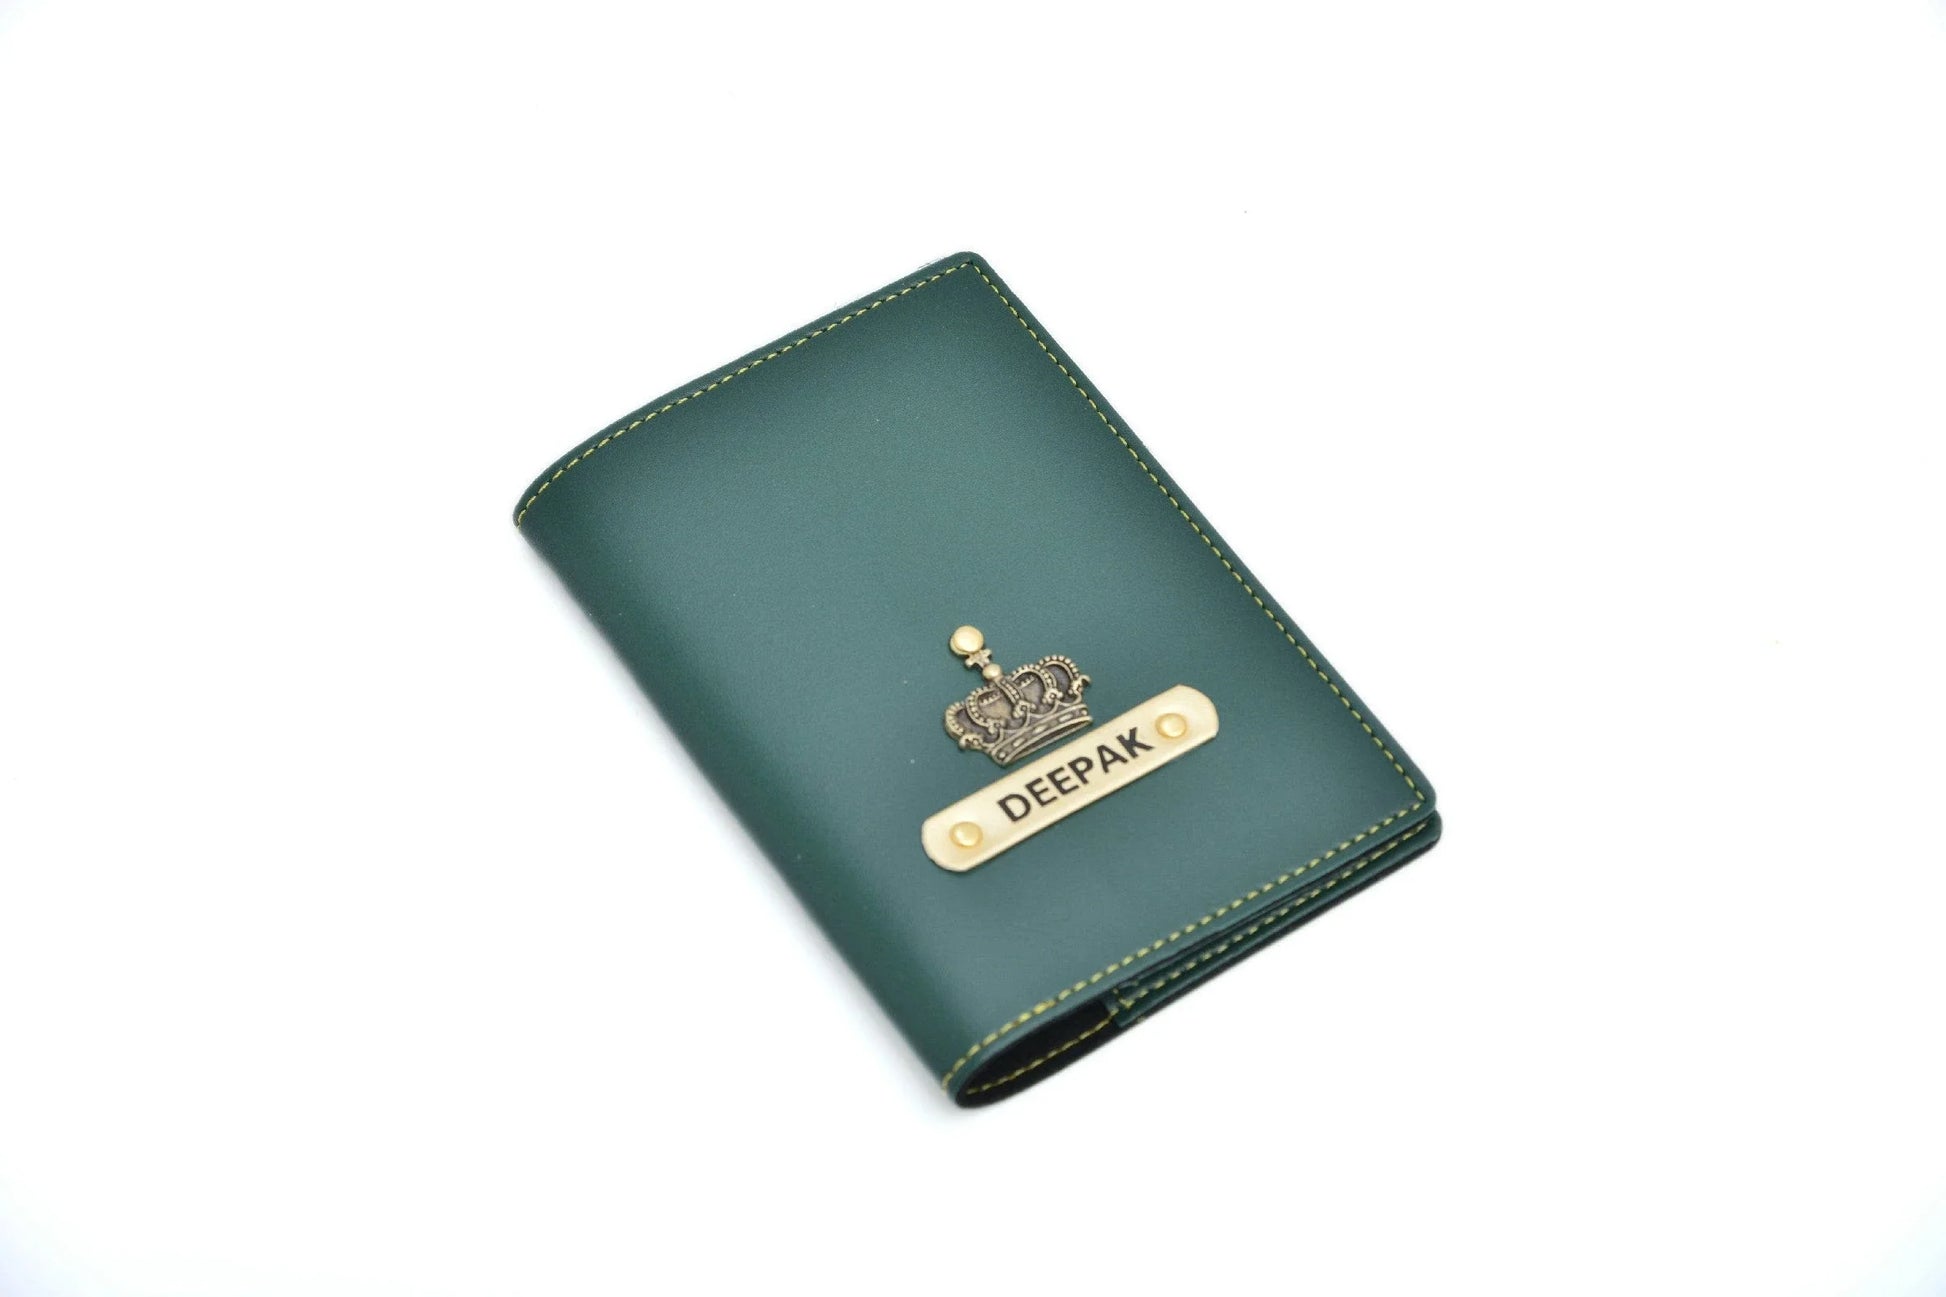 Set For Your Next Vacation. Safeguard The Most Vital Document - Your Passport In A Stylish Handmade Personalised Passport Cover. Secure Your Travel Documents From Any Kind Of Theft Or Damage Choosing One From Our Popular Passport Cover Designs;Features That Make It Essential To Your Travel List- 1-Can Hold Passport, Travel Documents. 2-Dimension: Standard Size. 3-Made Of Faux Leather With An Opulent Appeal